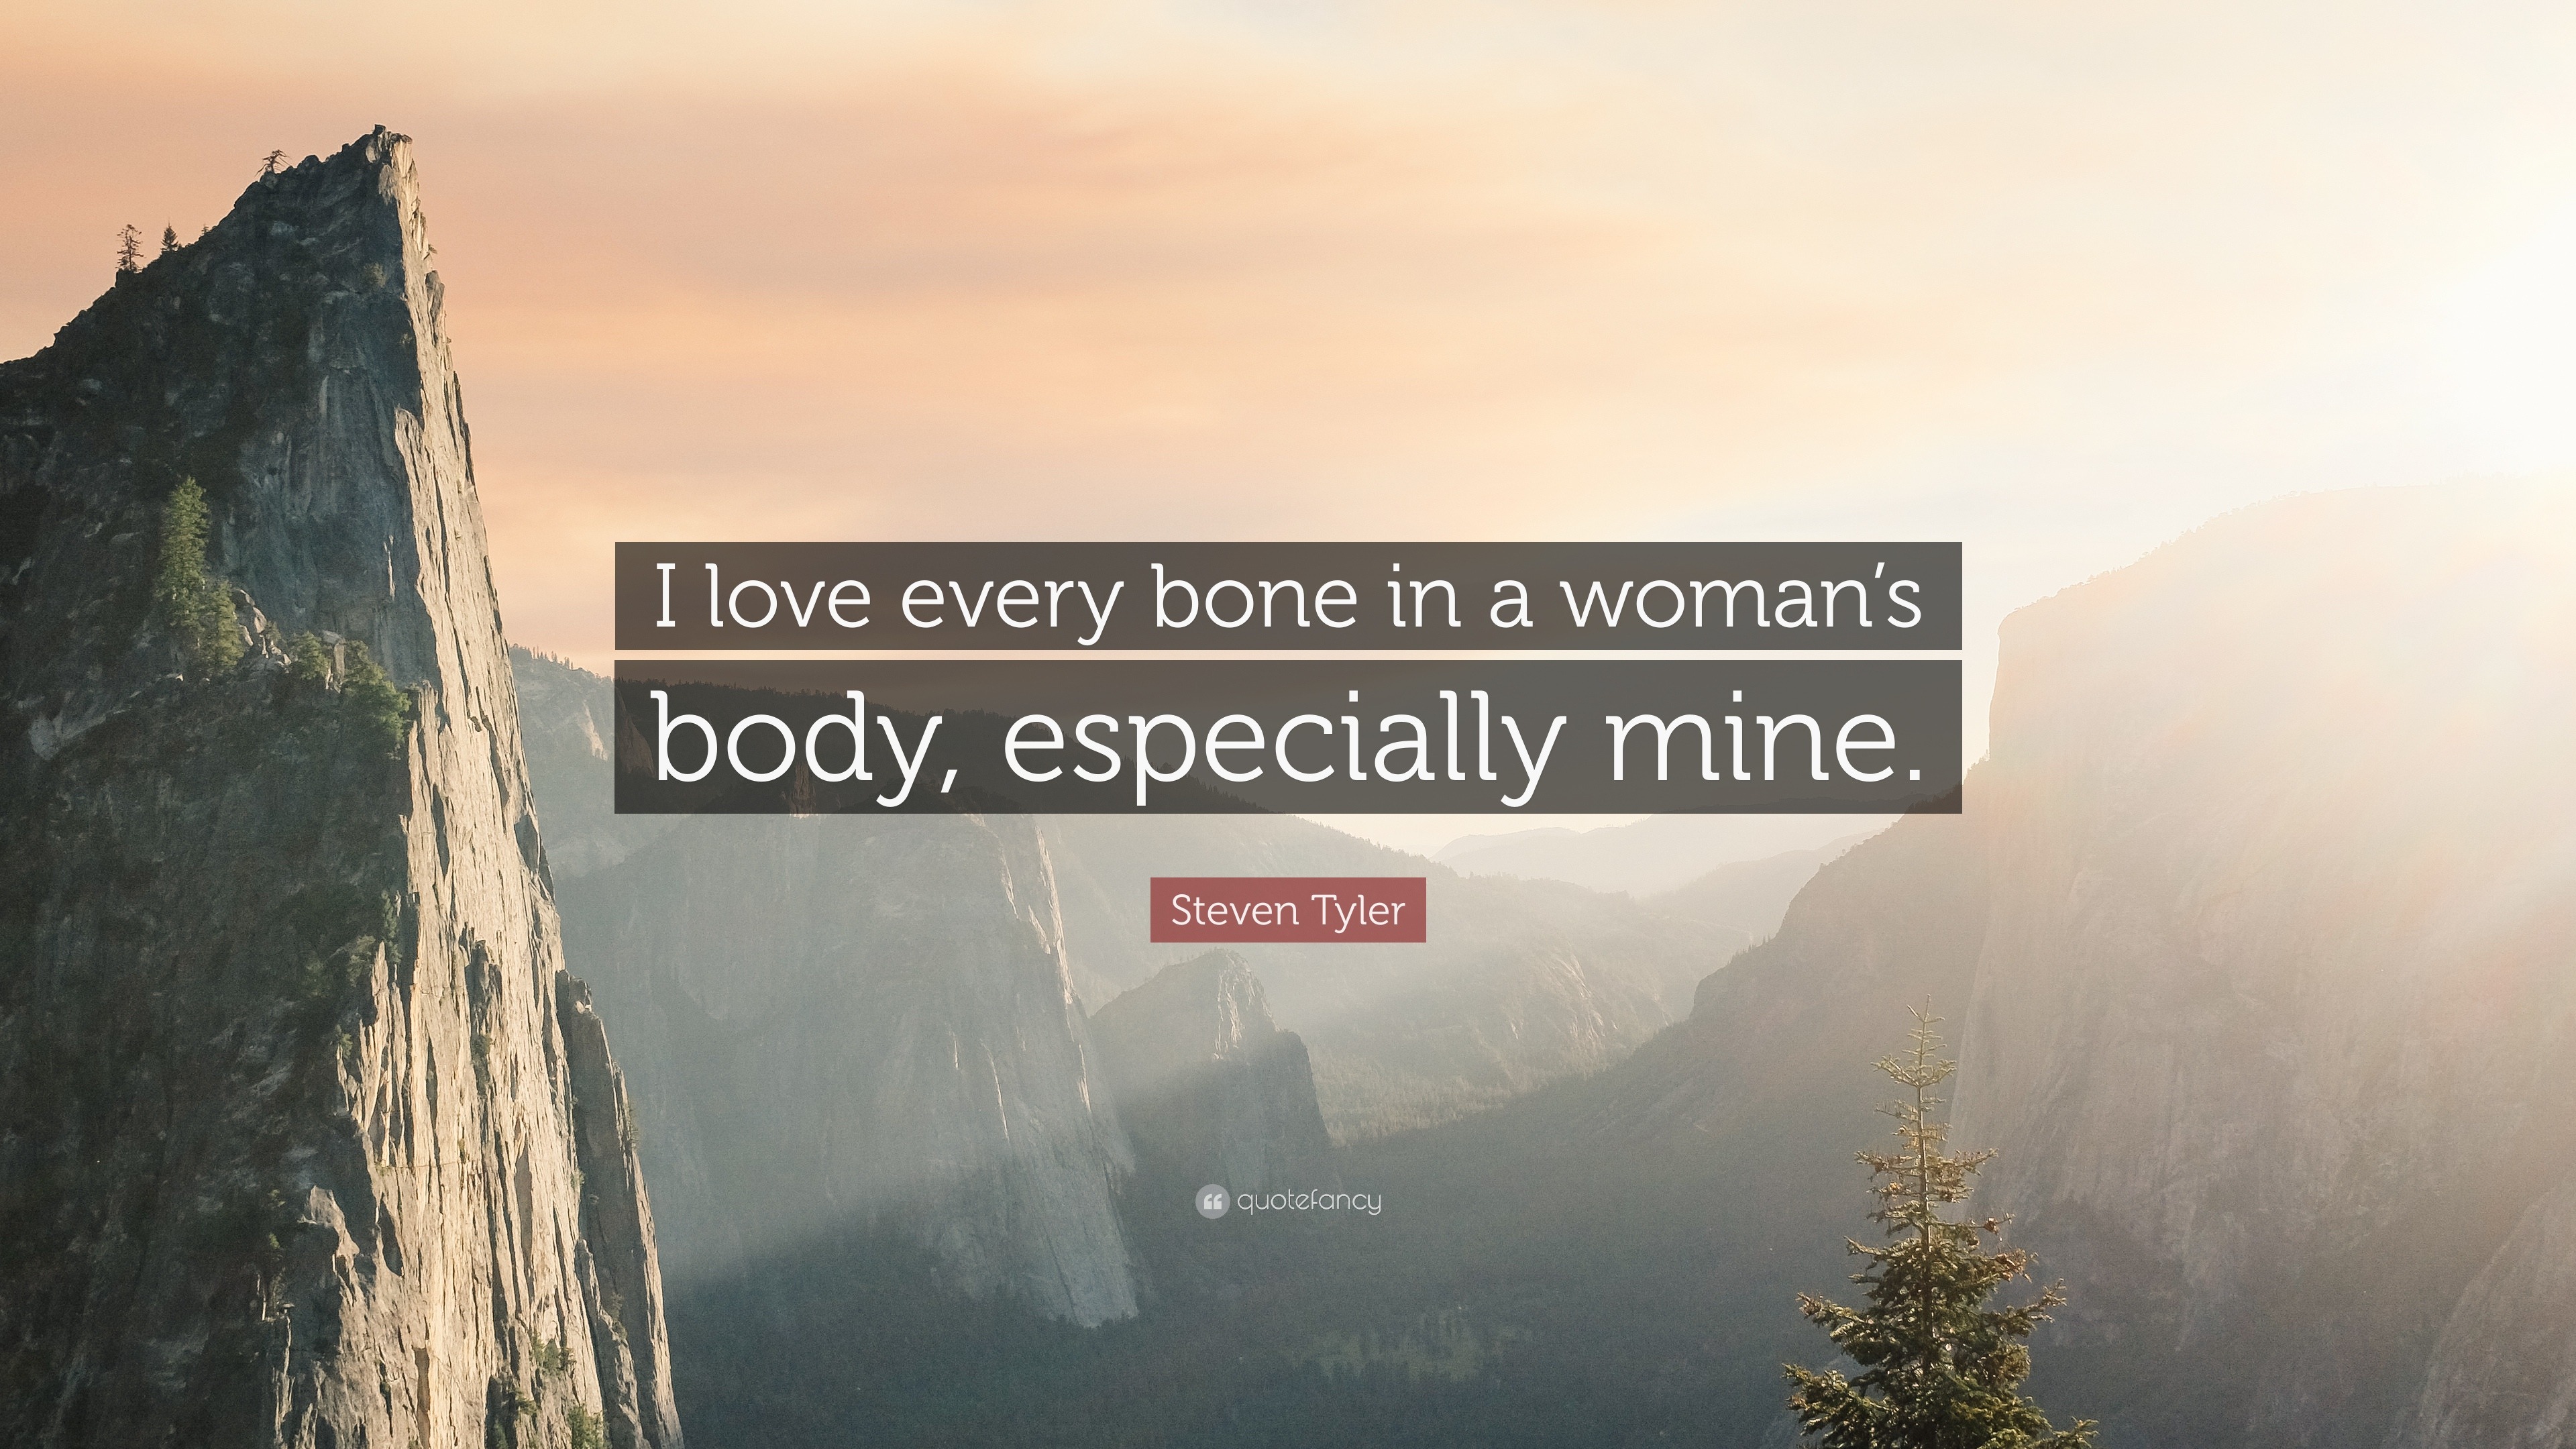 Steven Tyler Quote: “I love every bone in a woman's body, especially mine.”